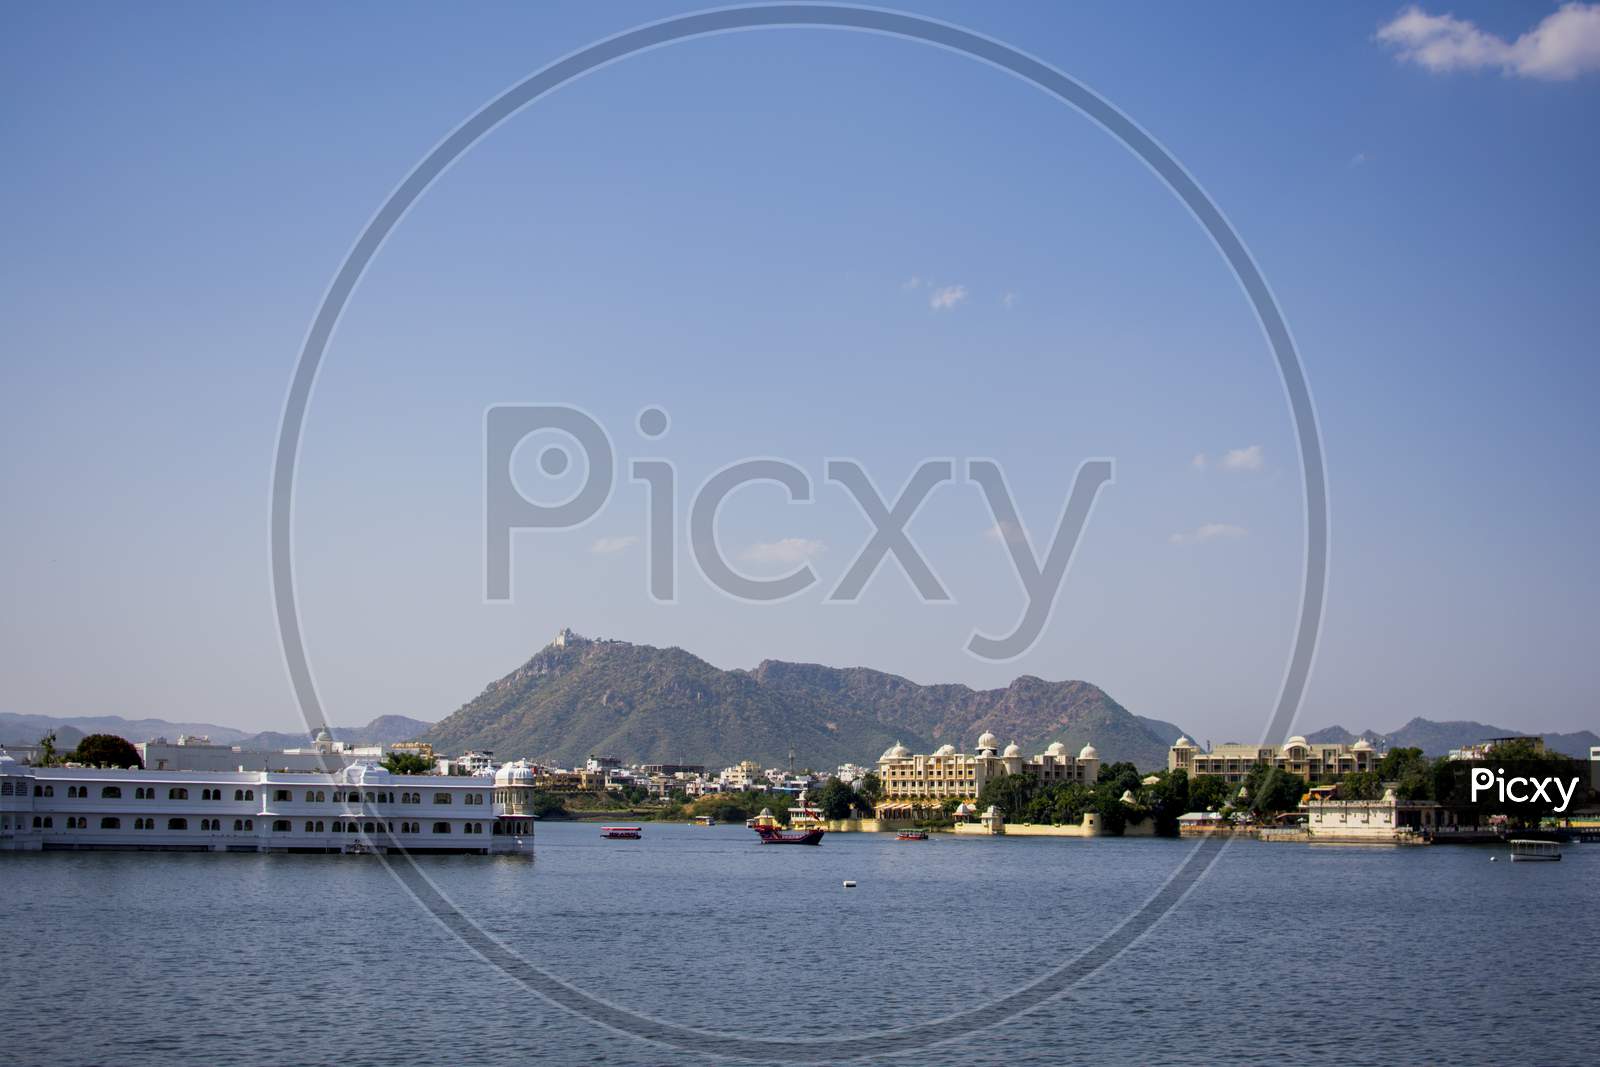 Pichola Lake Is Situated In Udaipur City In The Indian State Of Rajasthan